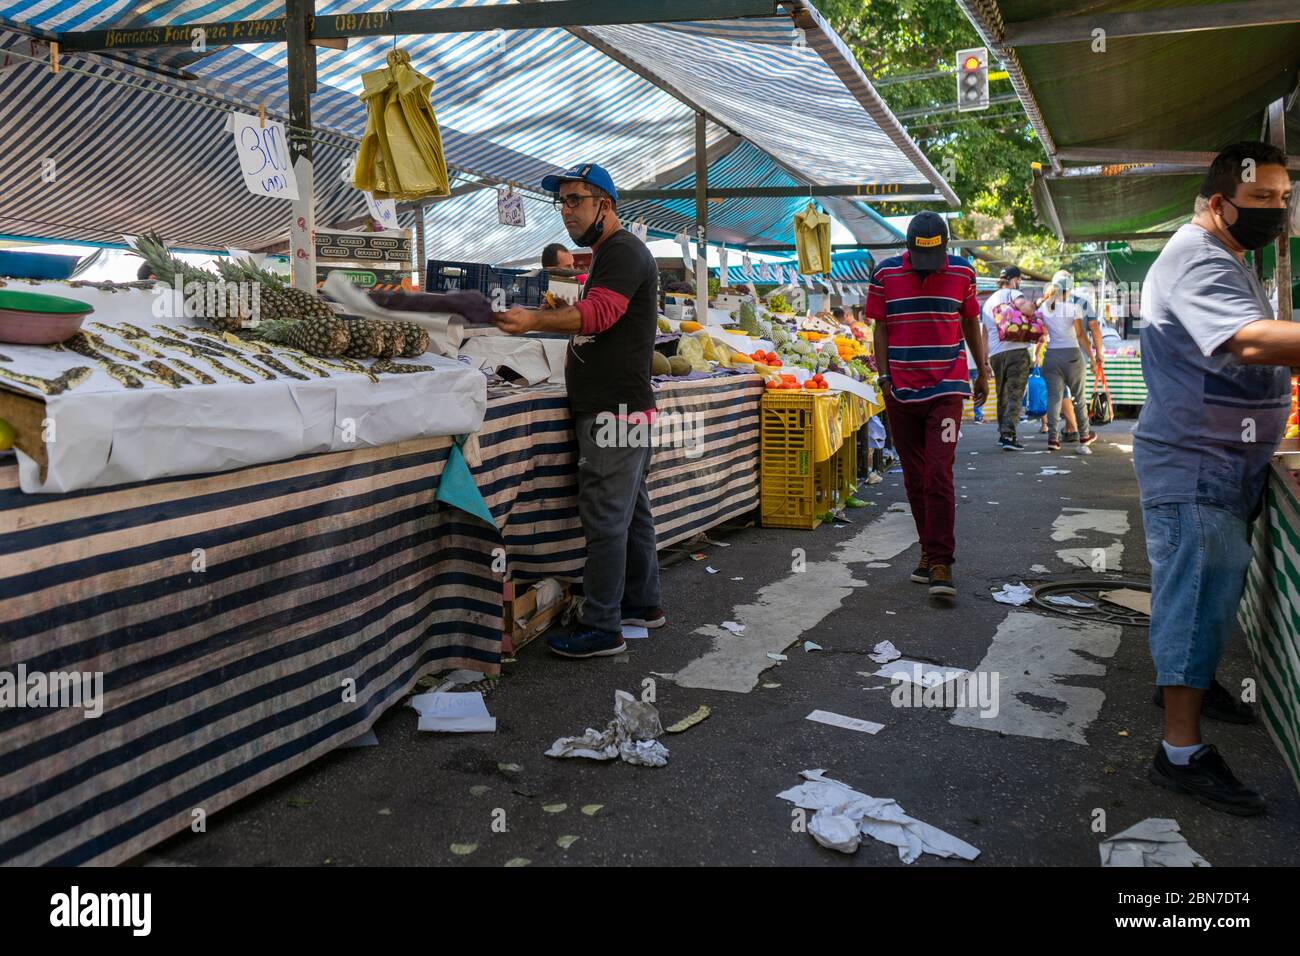 Open air street market in Sao Paulo, Brazil, during the COVID19 corona crisis in May 2020. Most shoppers are using mask but not social distancing Stock Photo